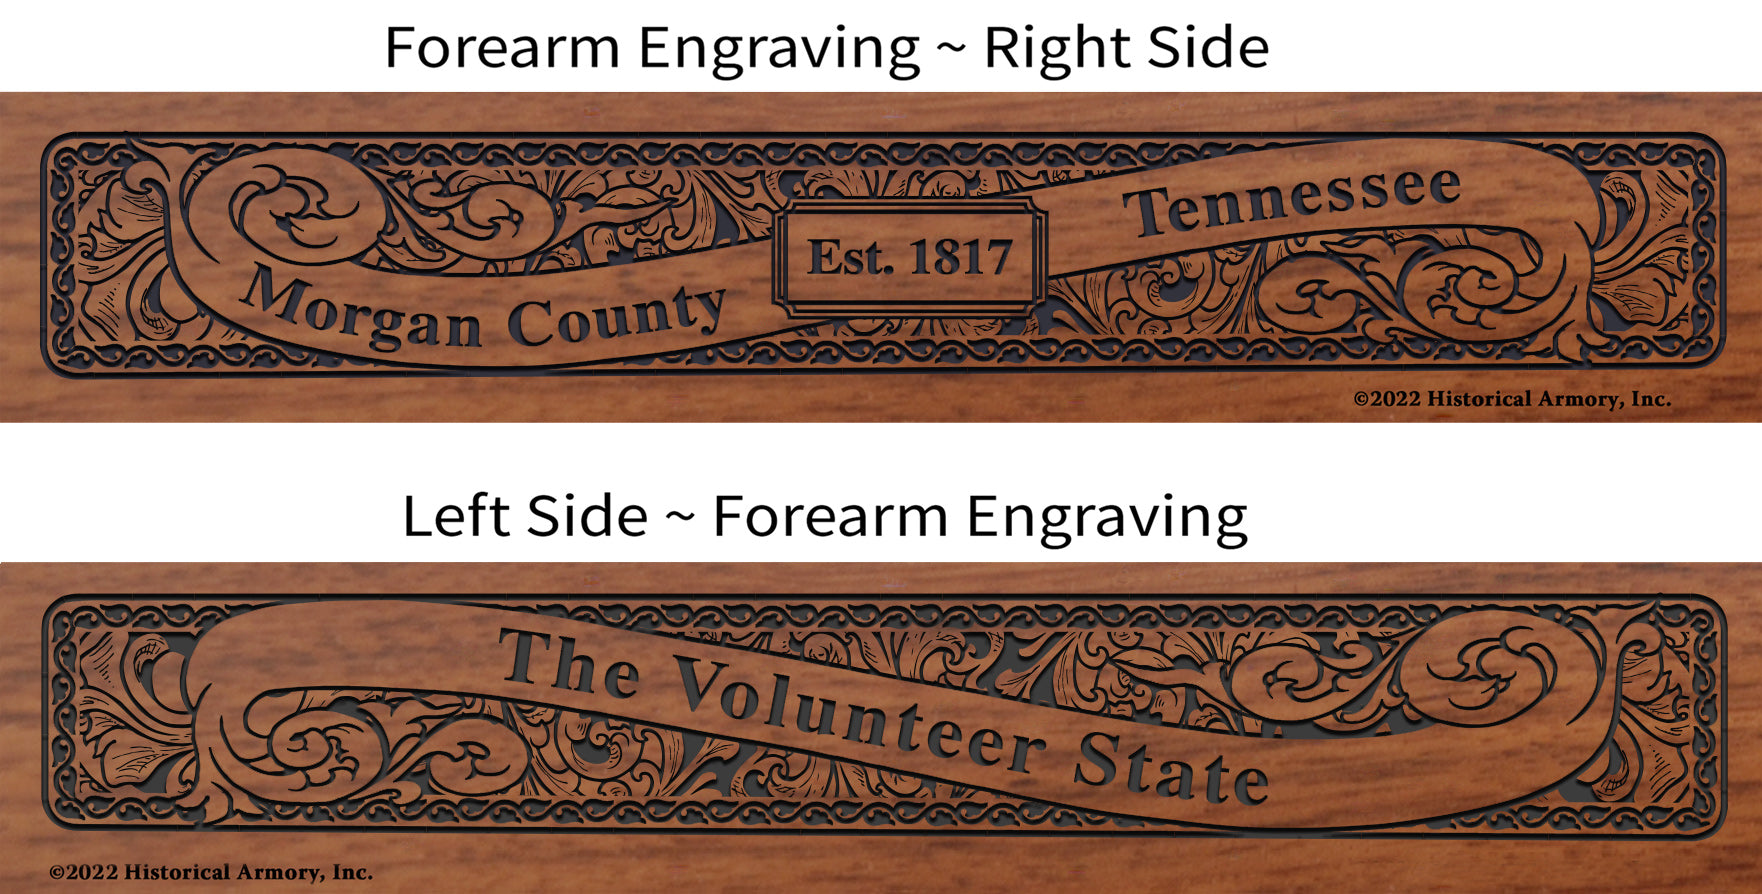 Morgan County Tennessee Engraved Rifle Forearm